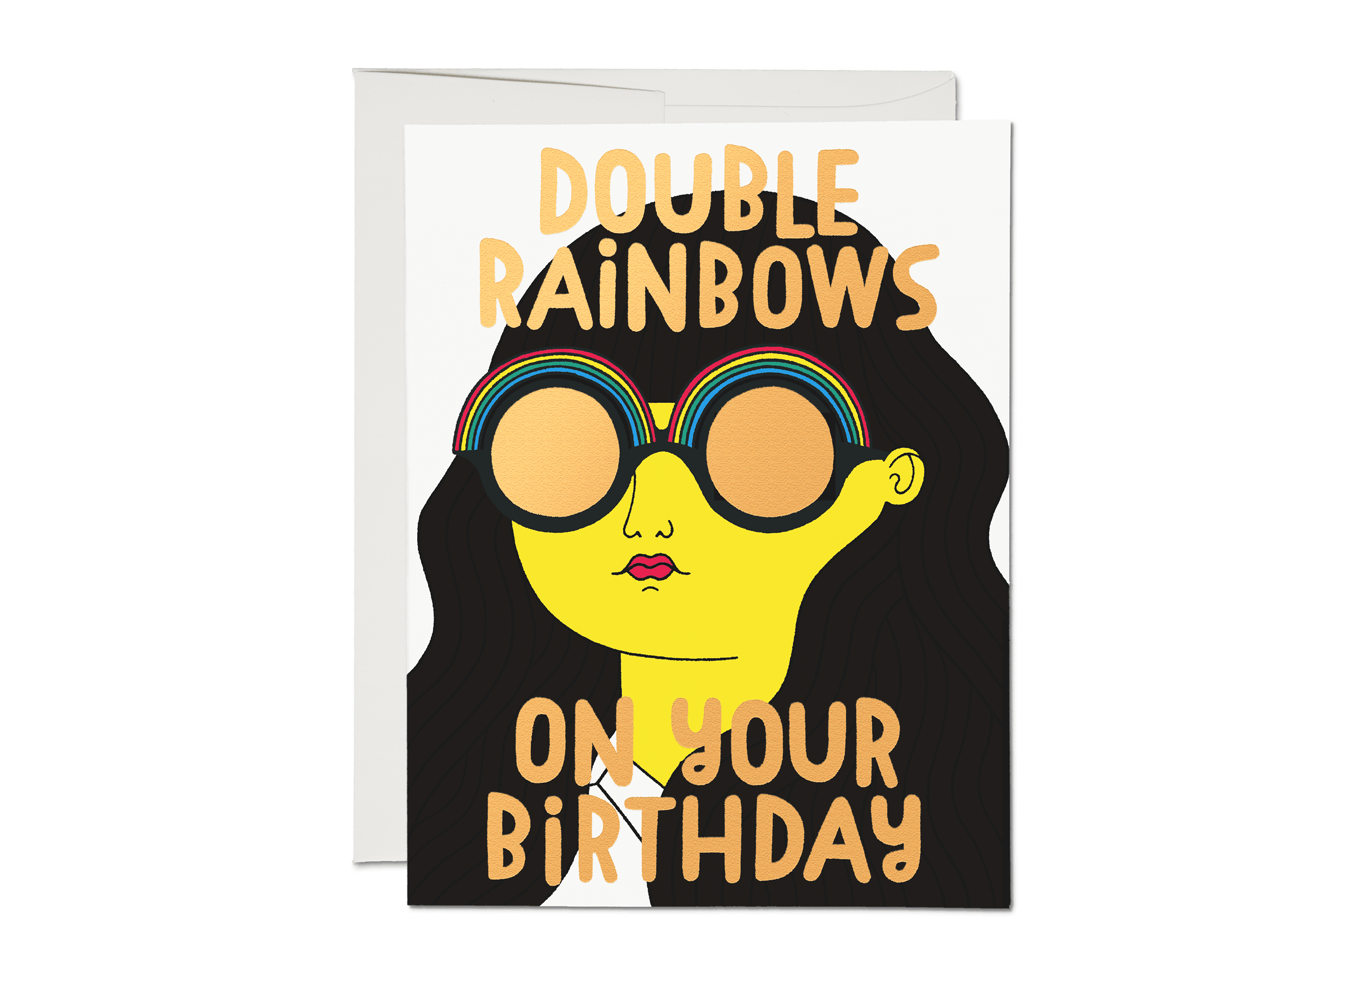 Double Rainbows birthday greeting card - Out of the Blue